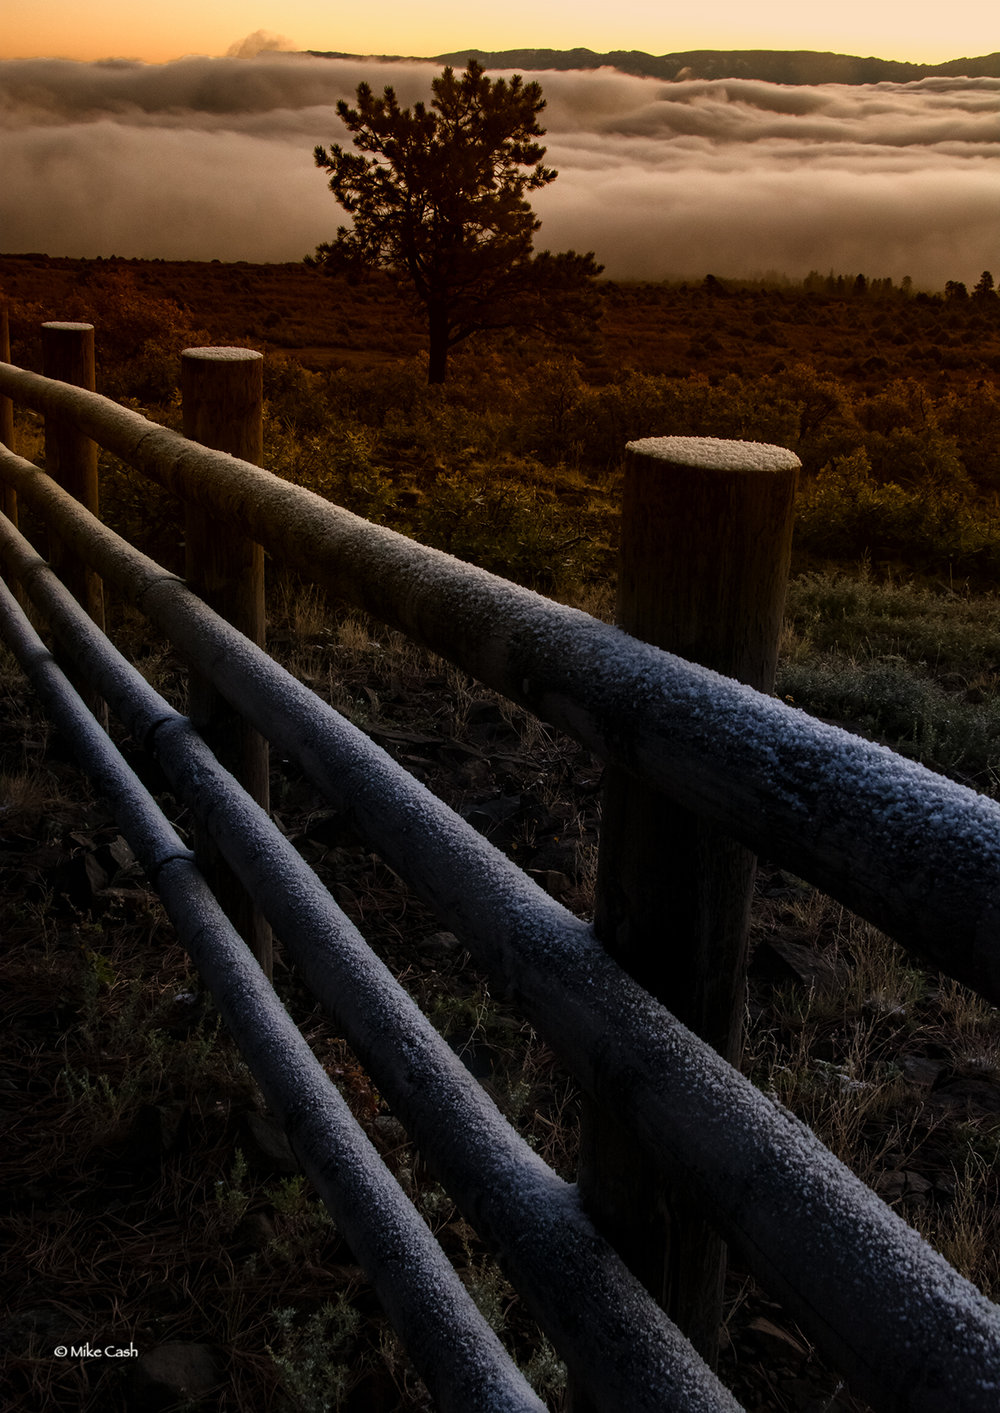  Fog over Ridgeway past an icy fence, 